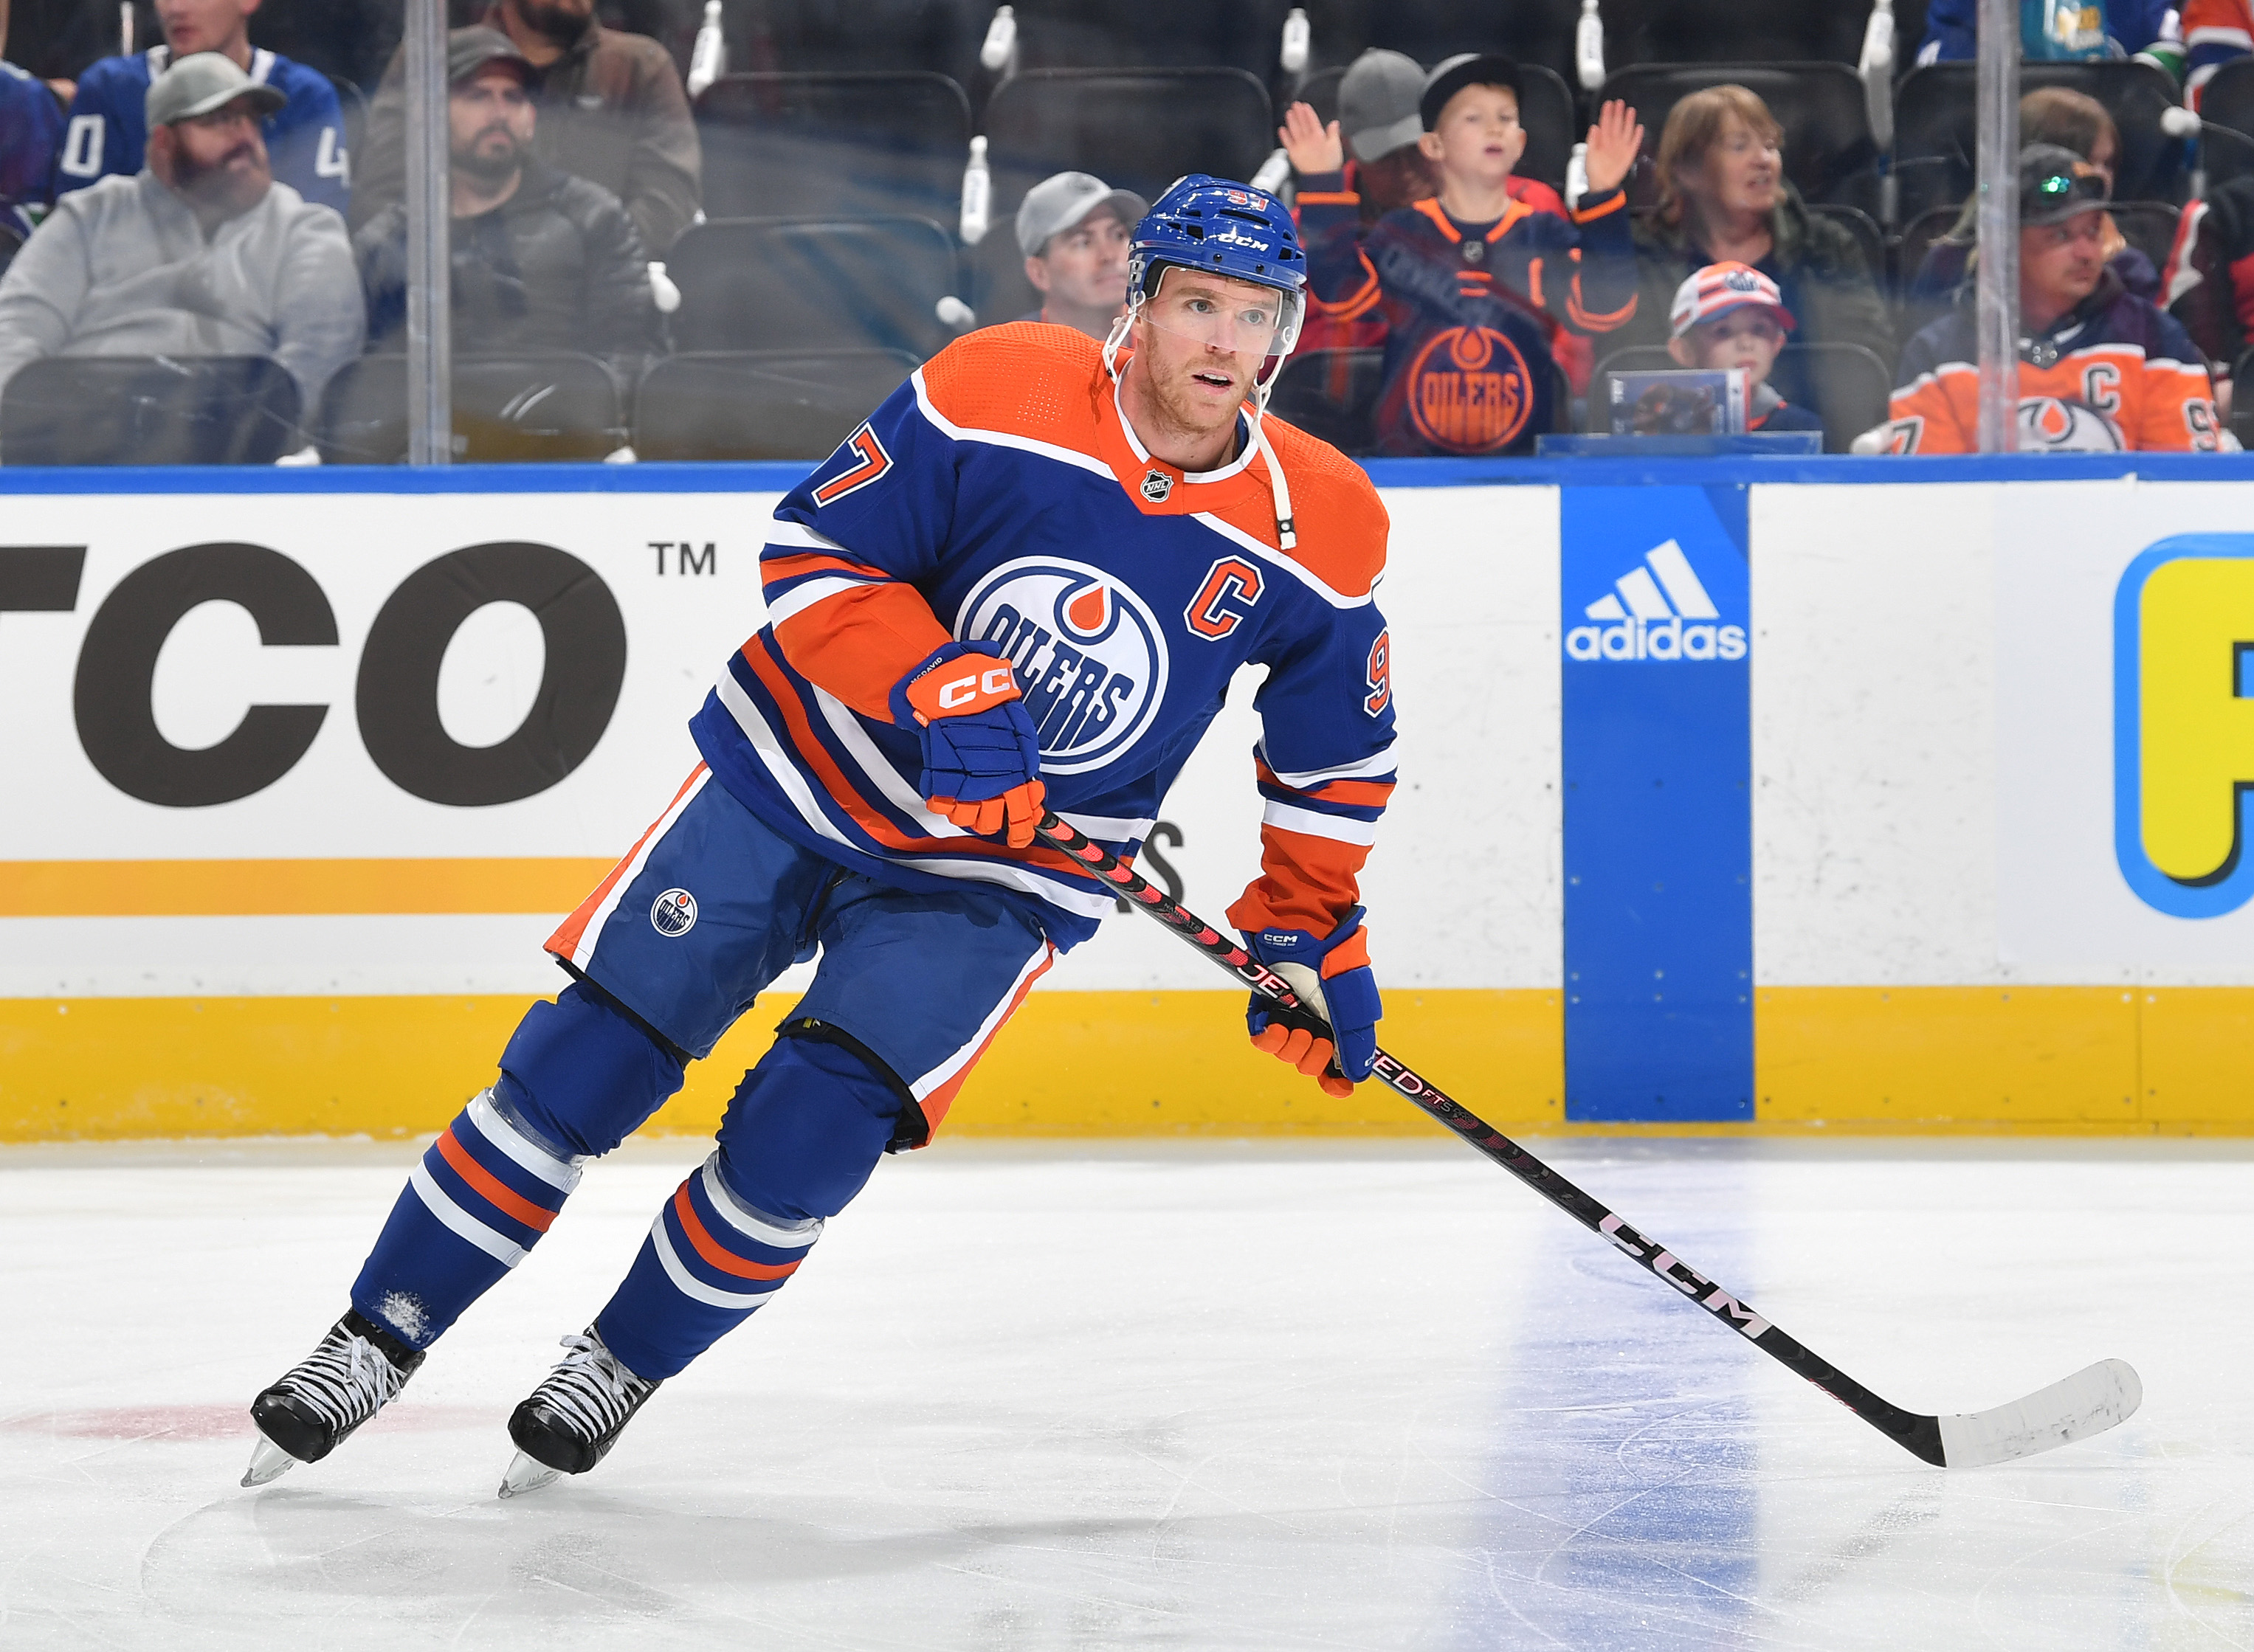 Connor McDavid of the Edmonton Oilers participates in the pre-game skate before the game against the Vancouver Canucks on October 12, 2022 at Rogers Place in Edmonton, Alberta, Canada.